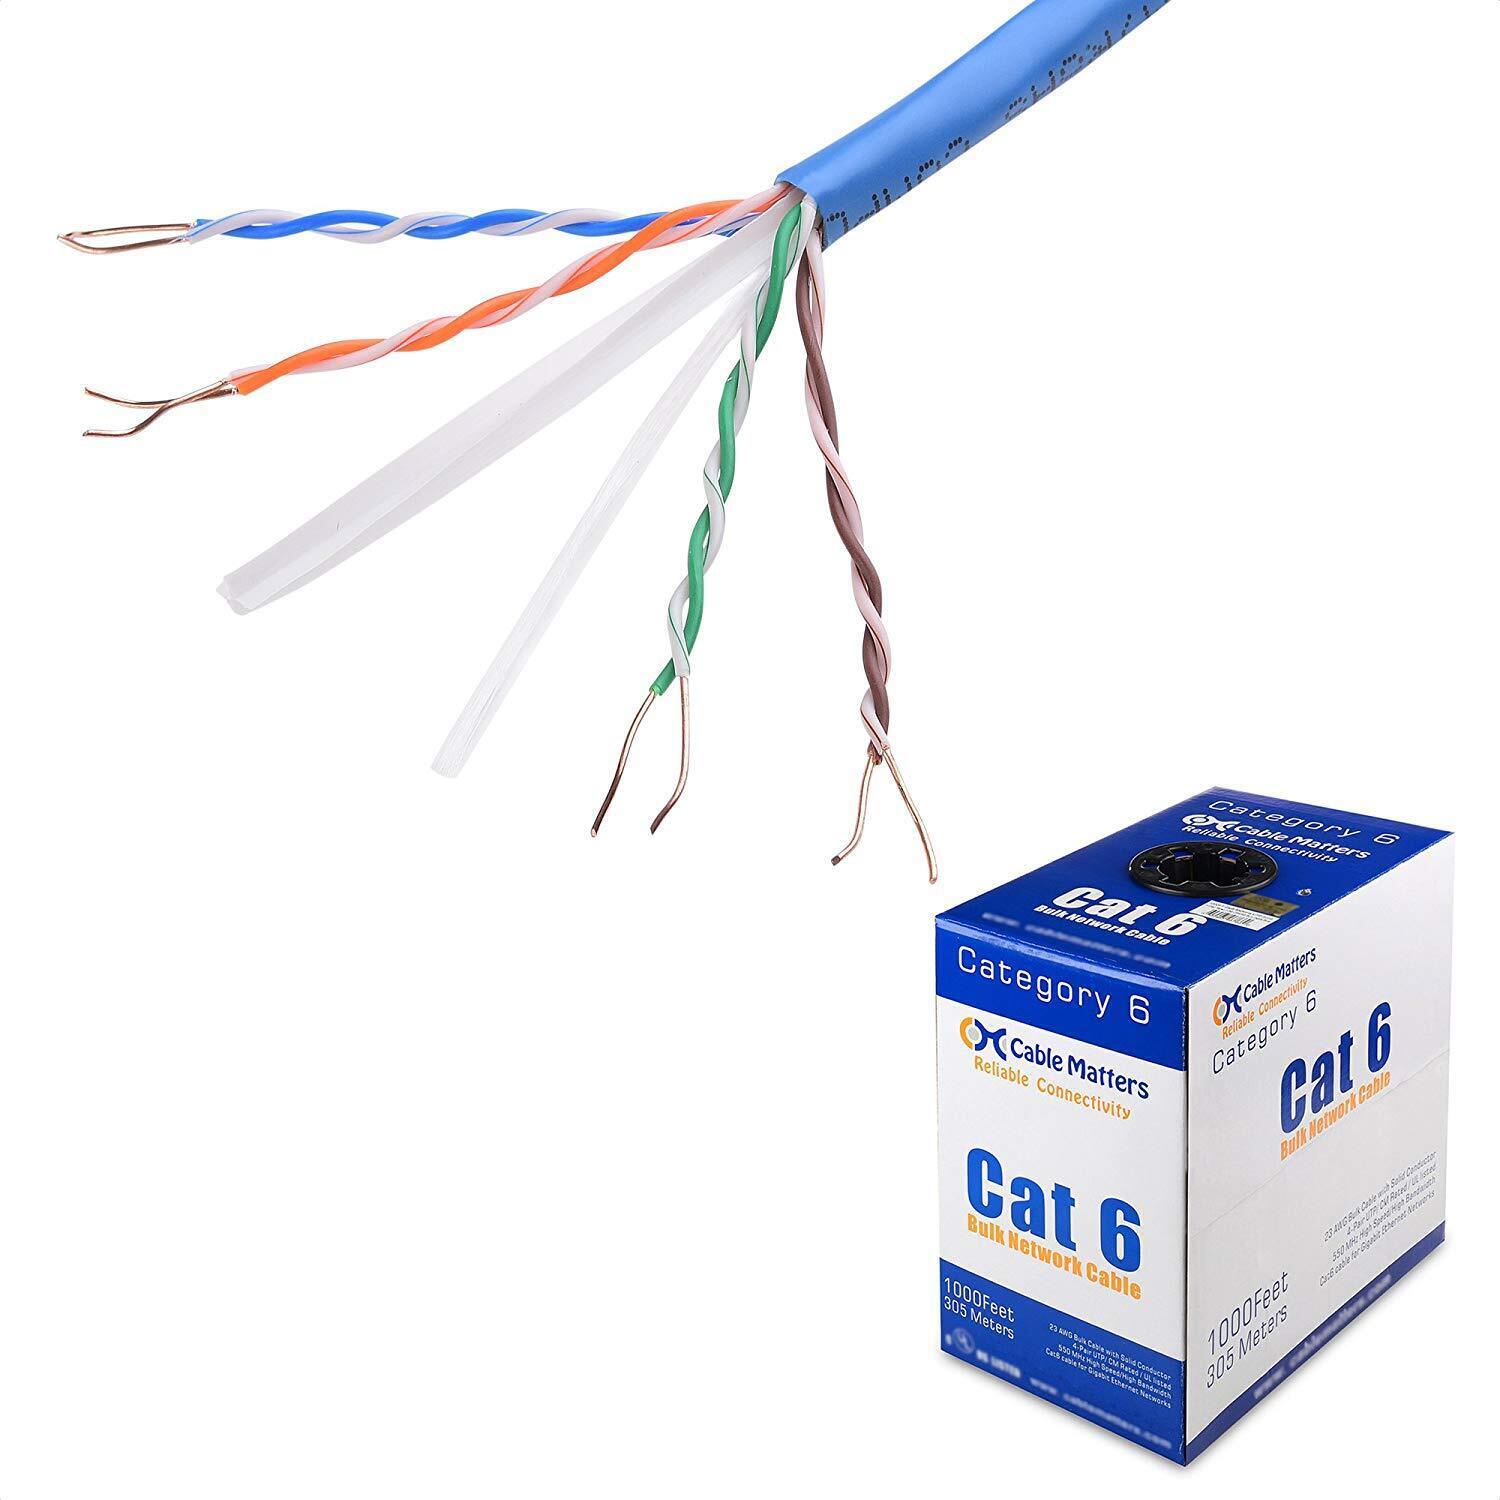 Cable Matters 10Gbps UL Listed in-Wall (cm) Rated Bare Copper Cat 6 Cable 1000